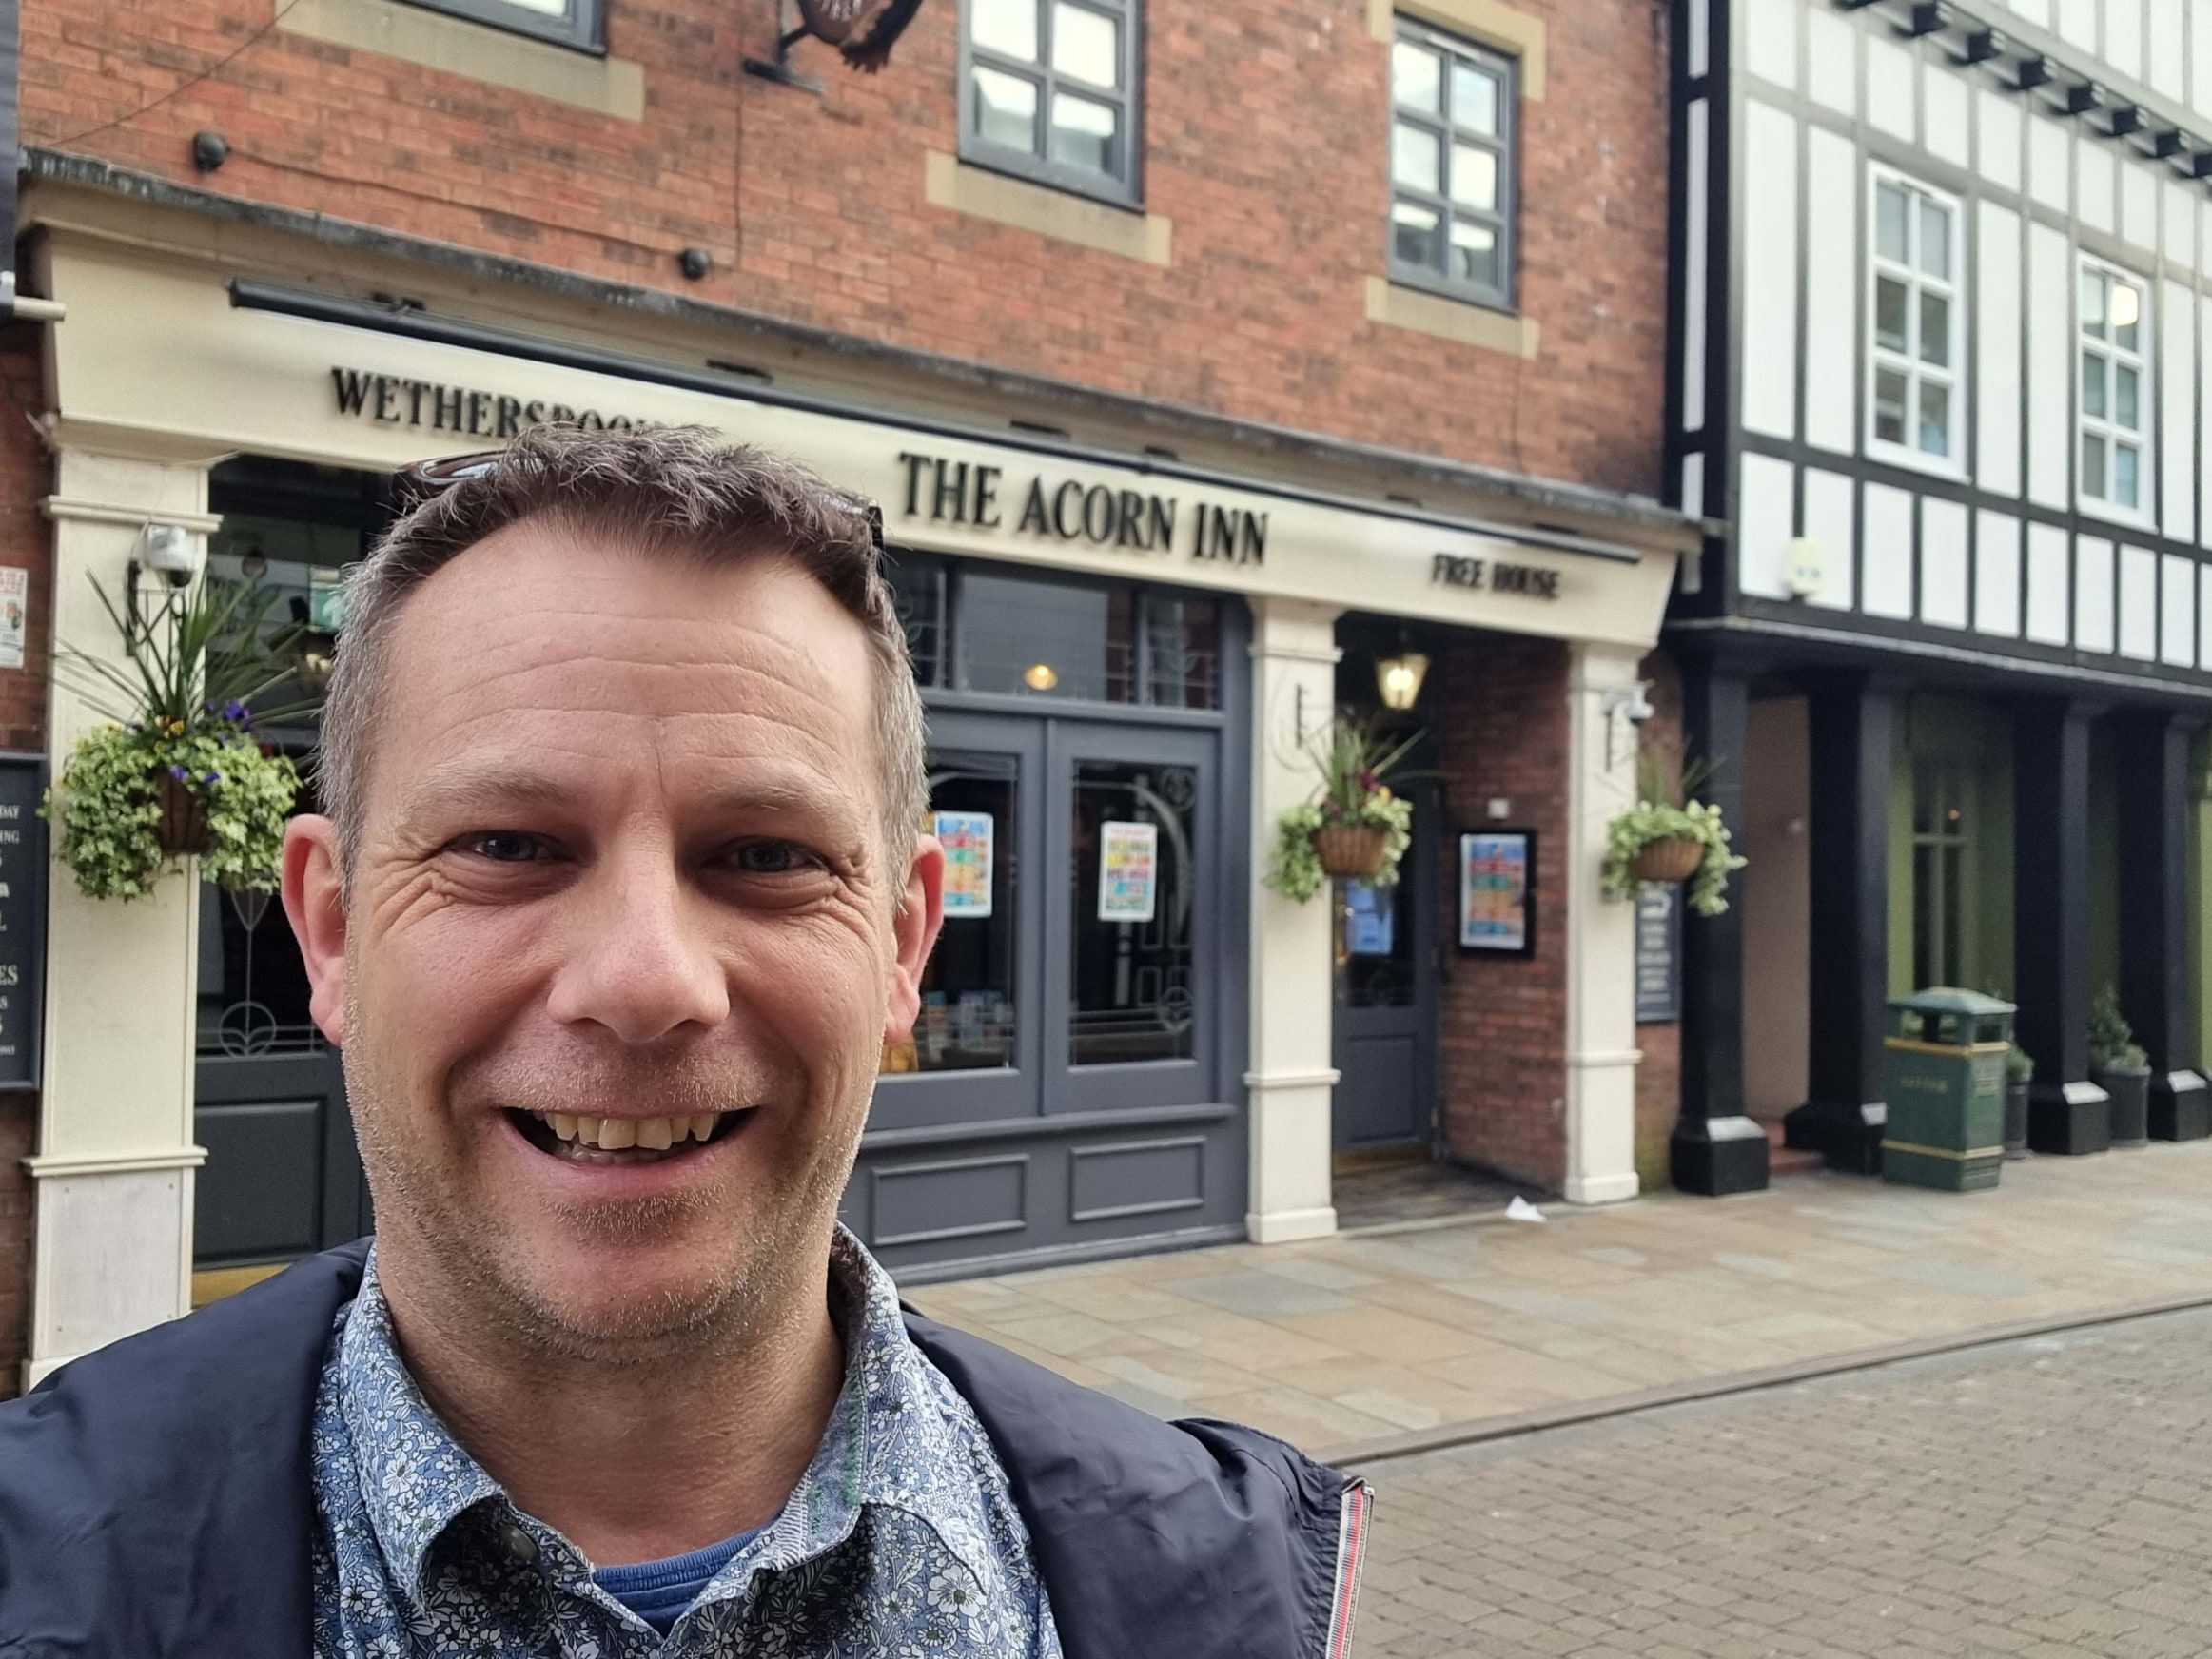 Man at the Spoons: Meet the legend who's been to more than 900 Wetherspoons